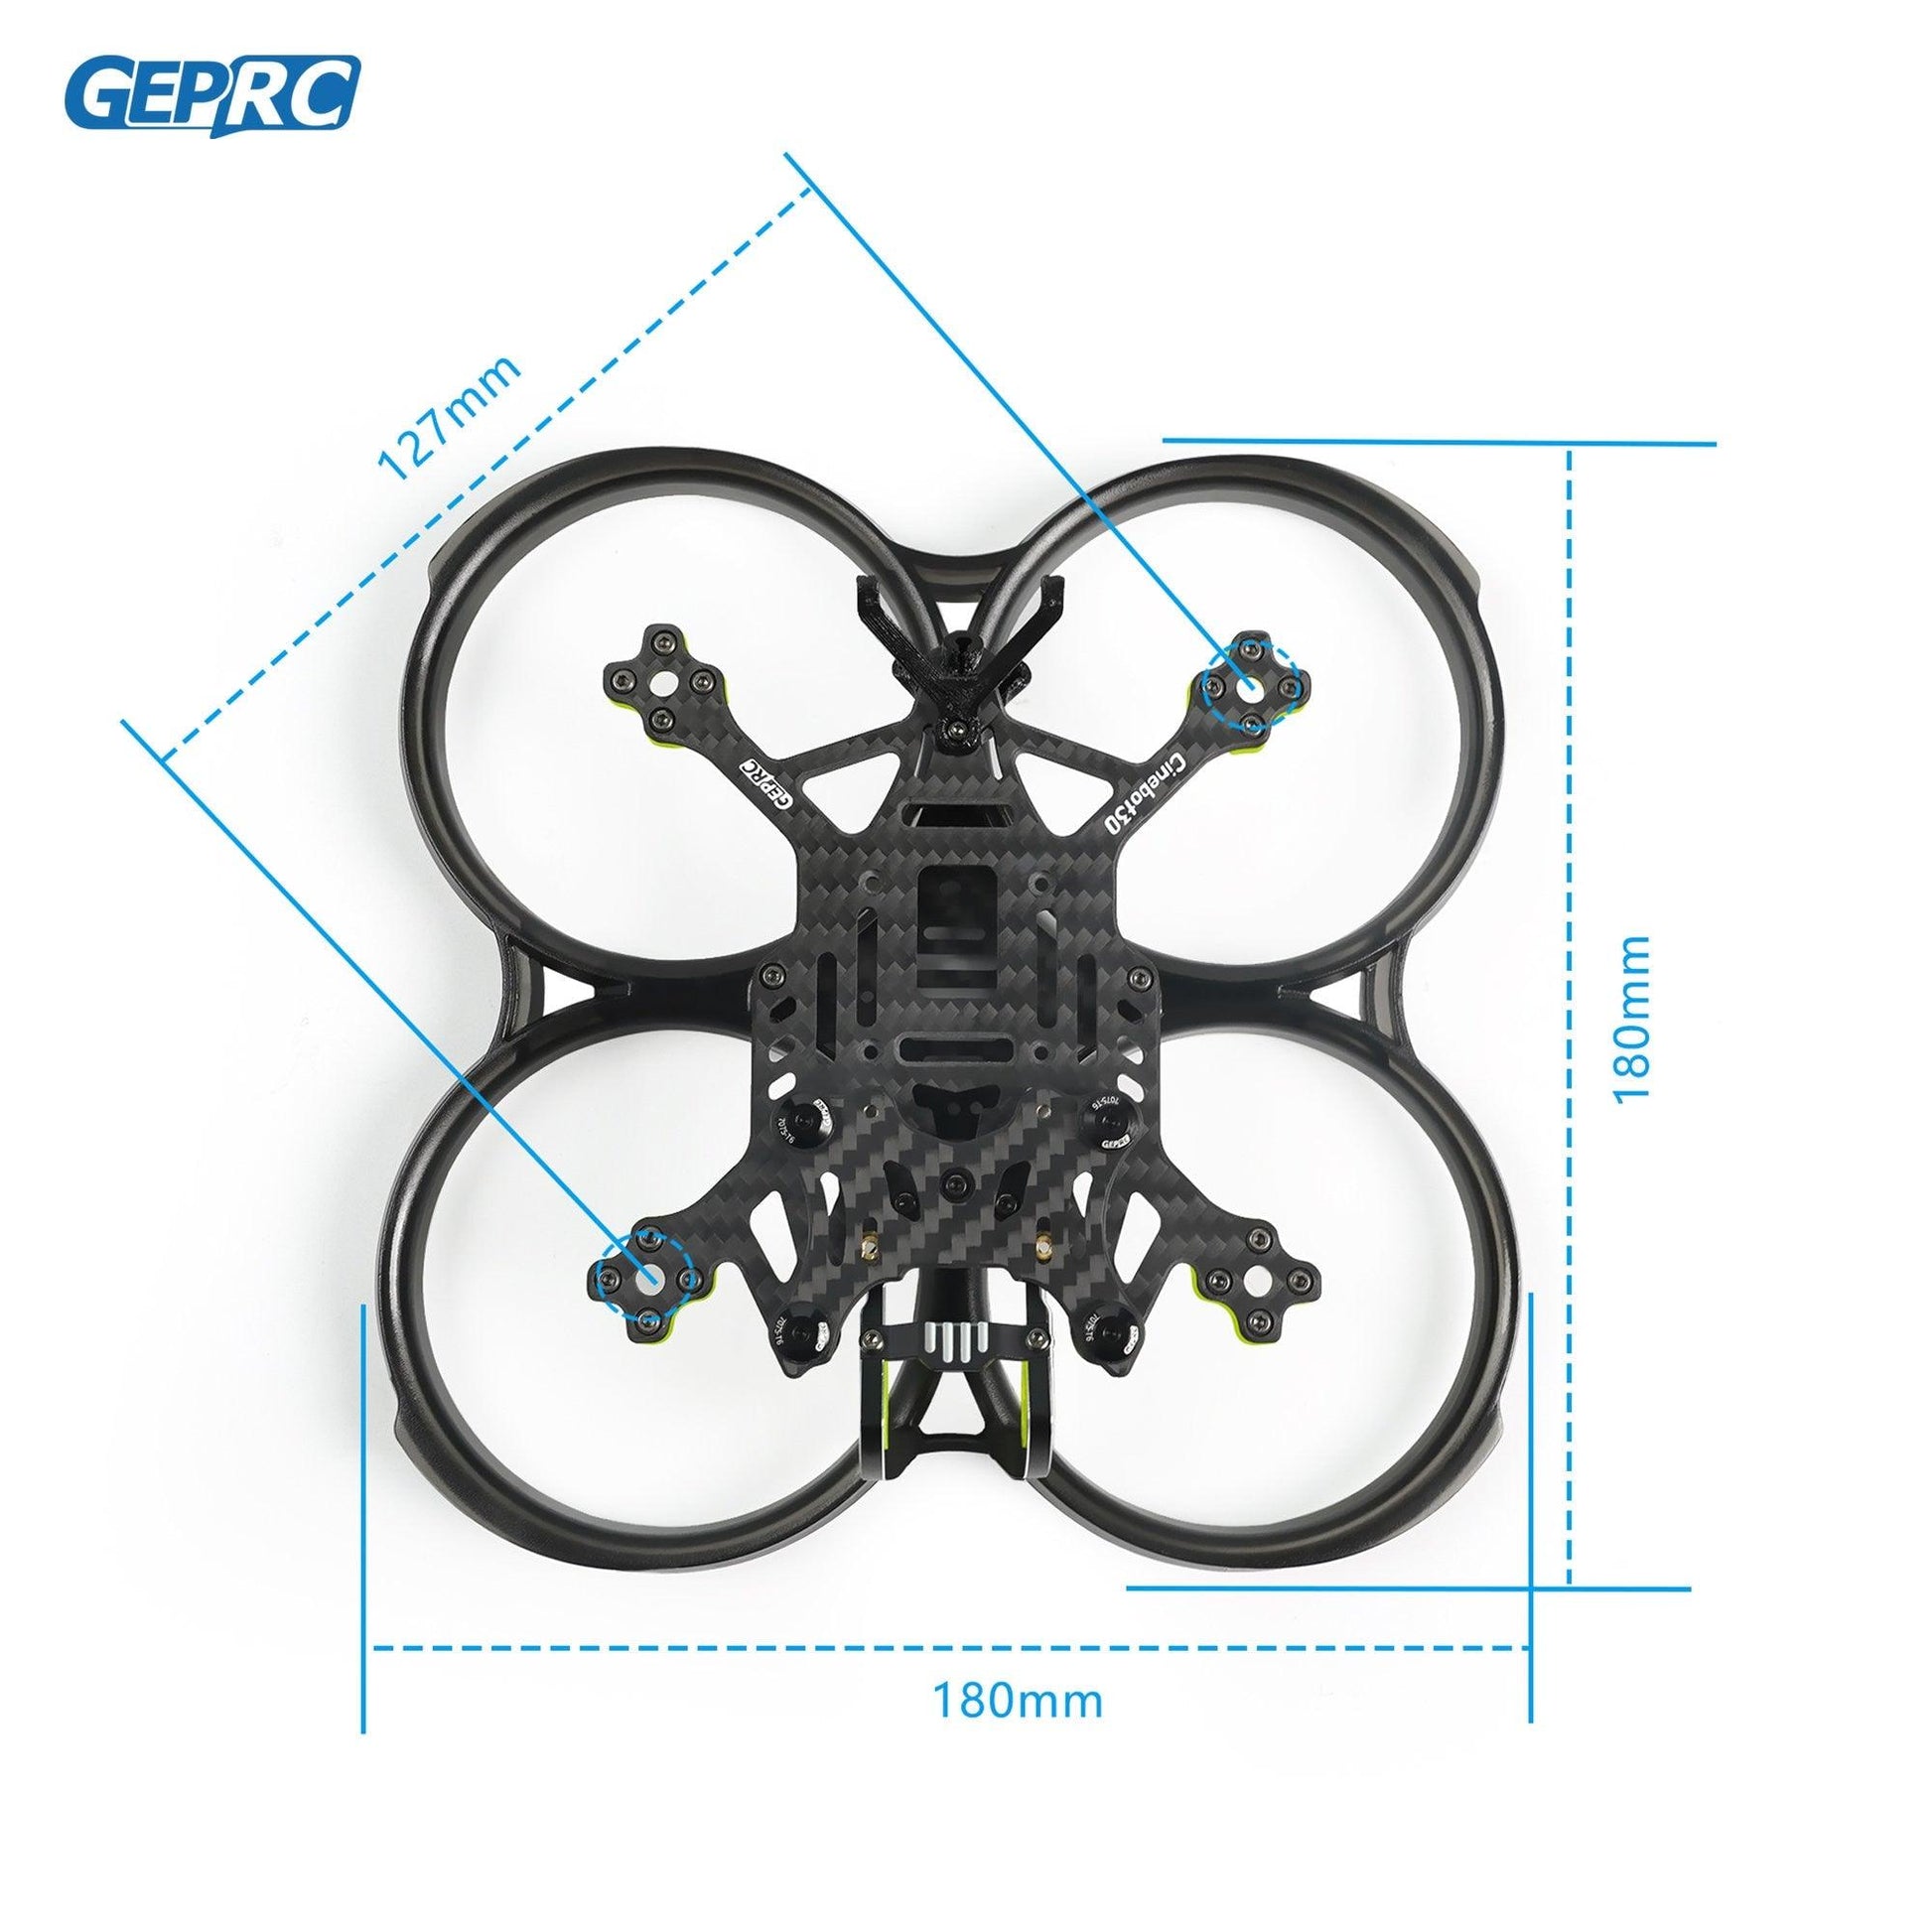 GEPRC GEP-CT30 O3 FPV Frame Kit Parts 3inch Propeller Accessory Base Quadcopter Frame FPV Freestyle RC Racing Drone Cinebot30 - RCDrone